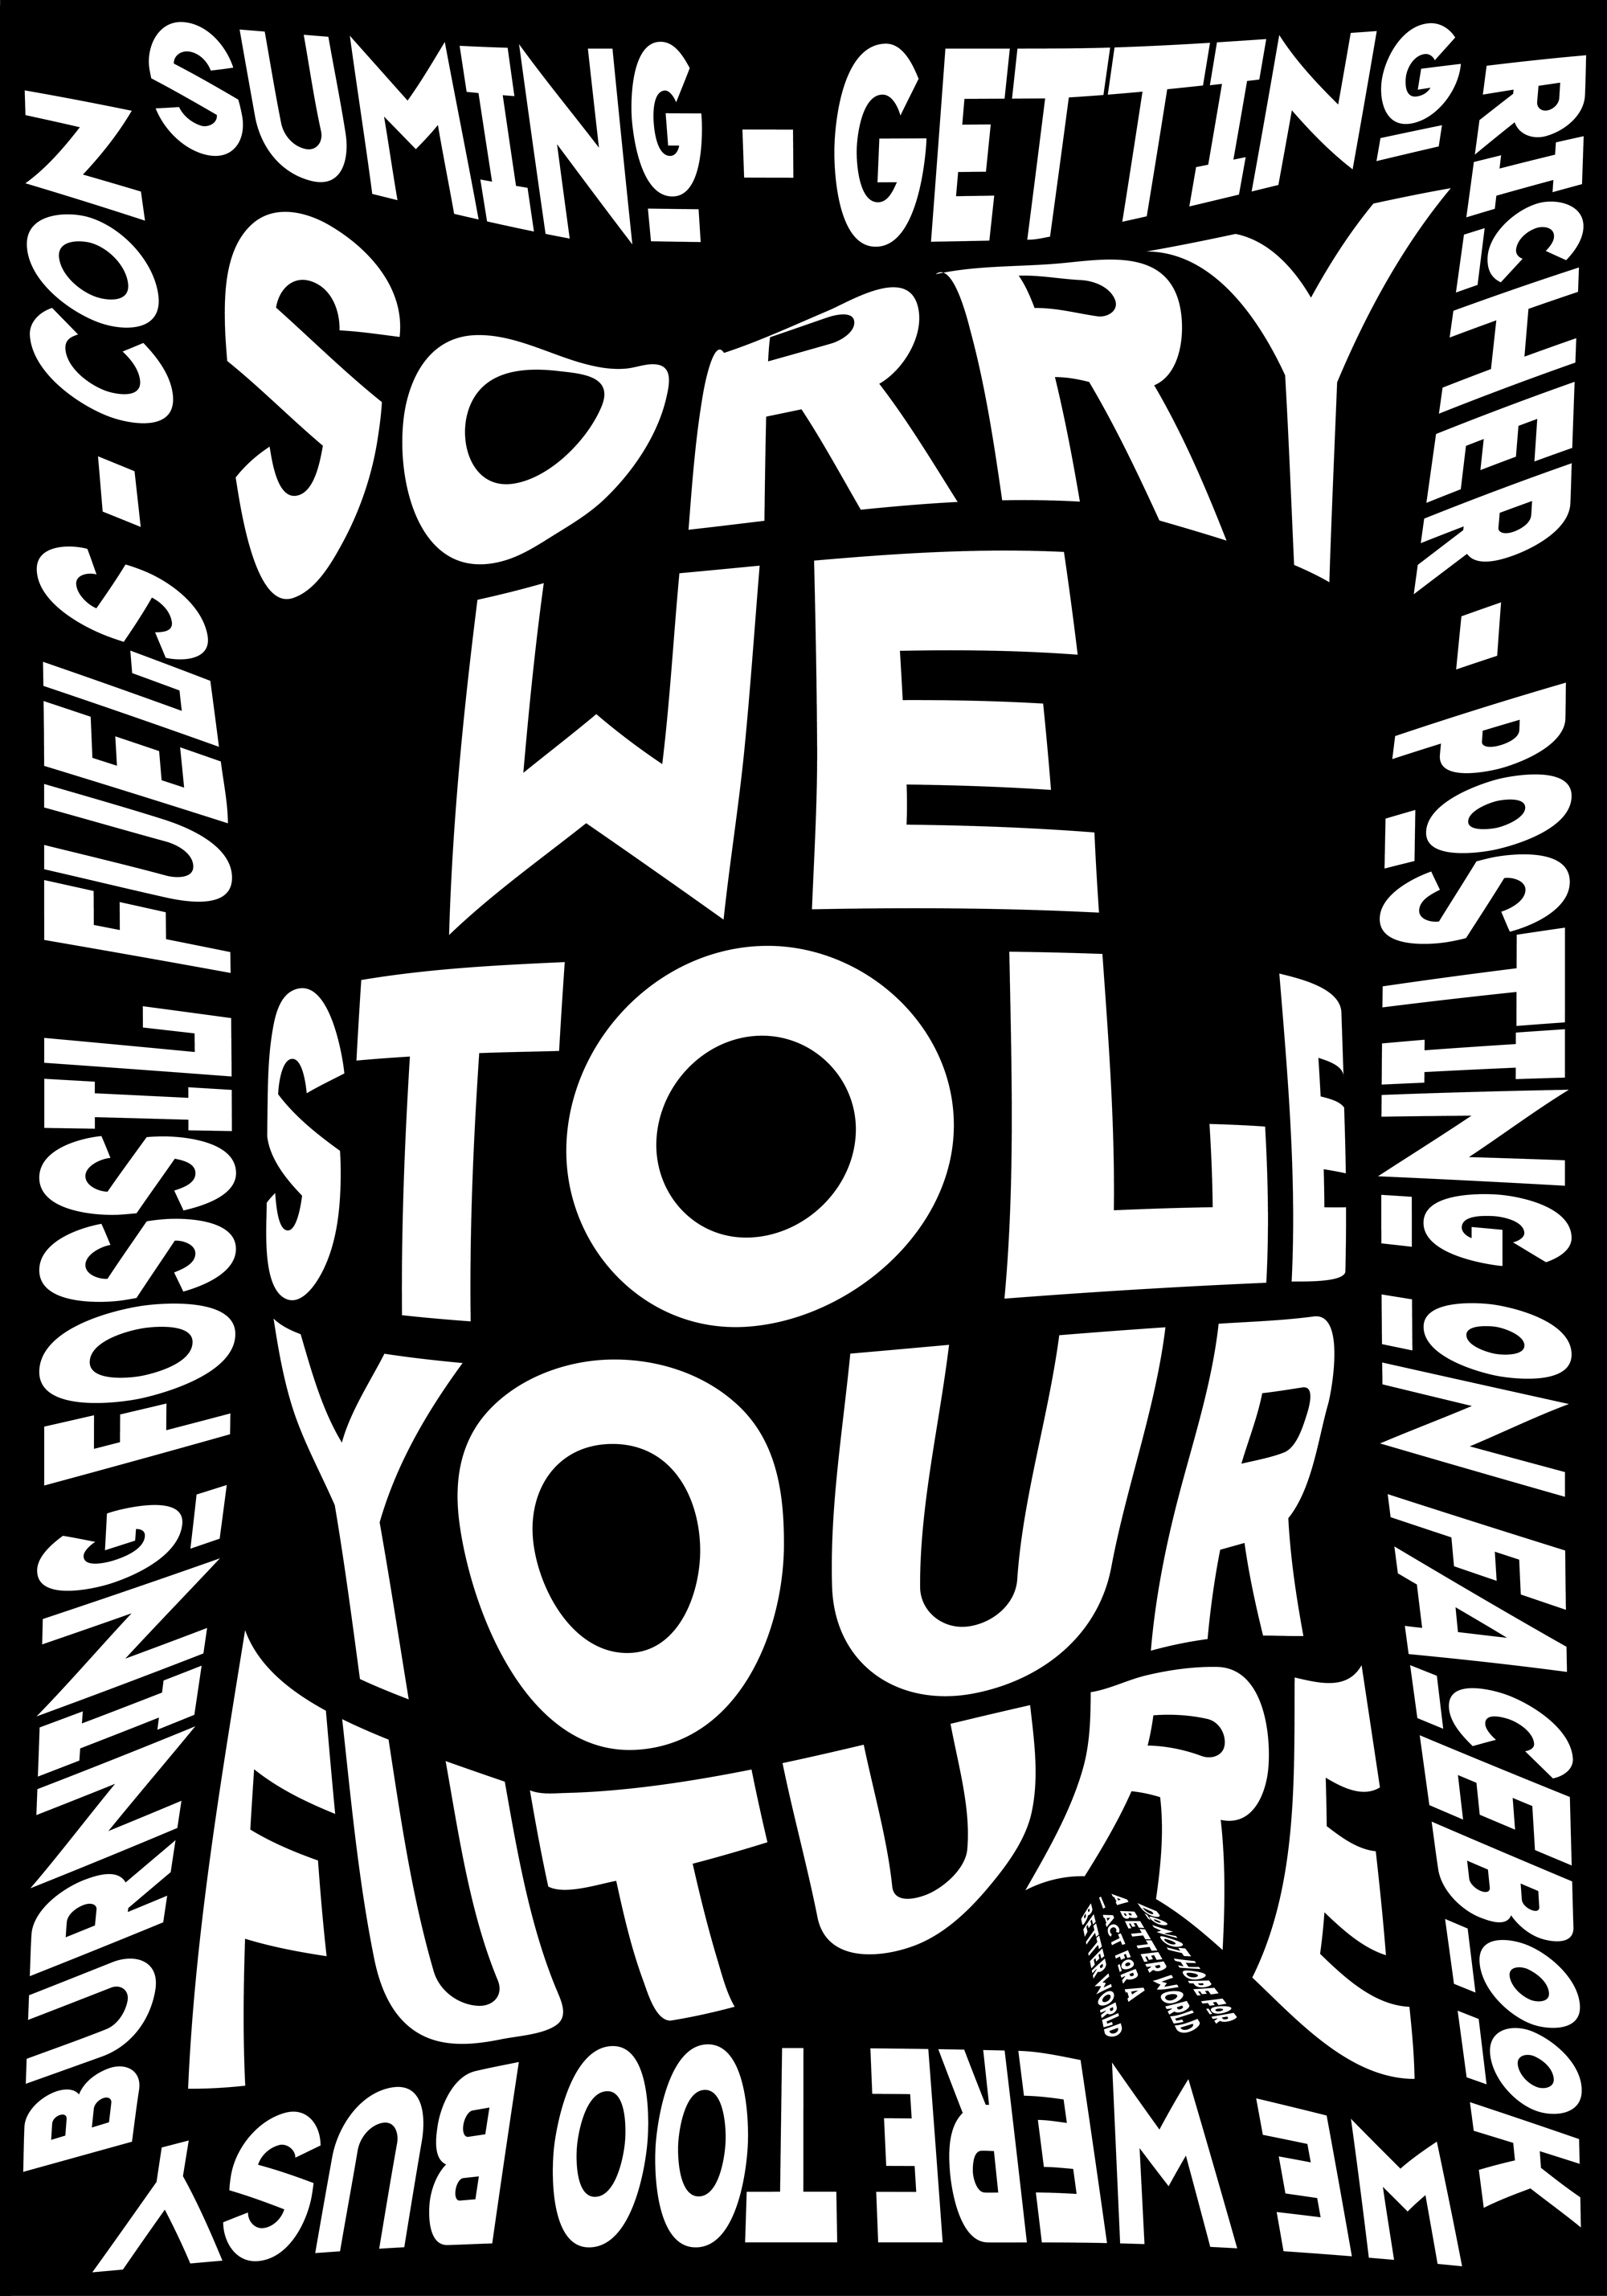 Sorry-we-stole-your-future_FINAL_70x100